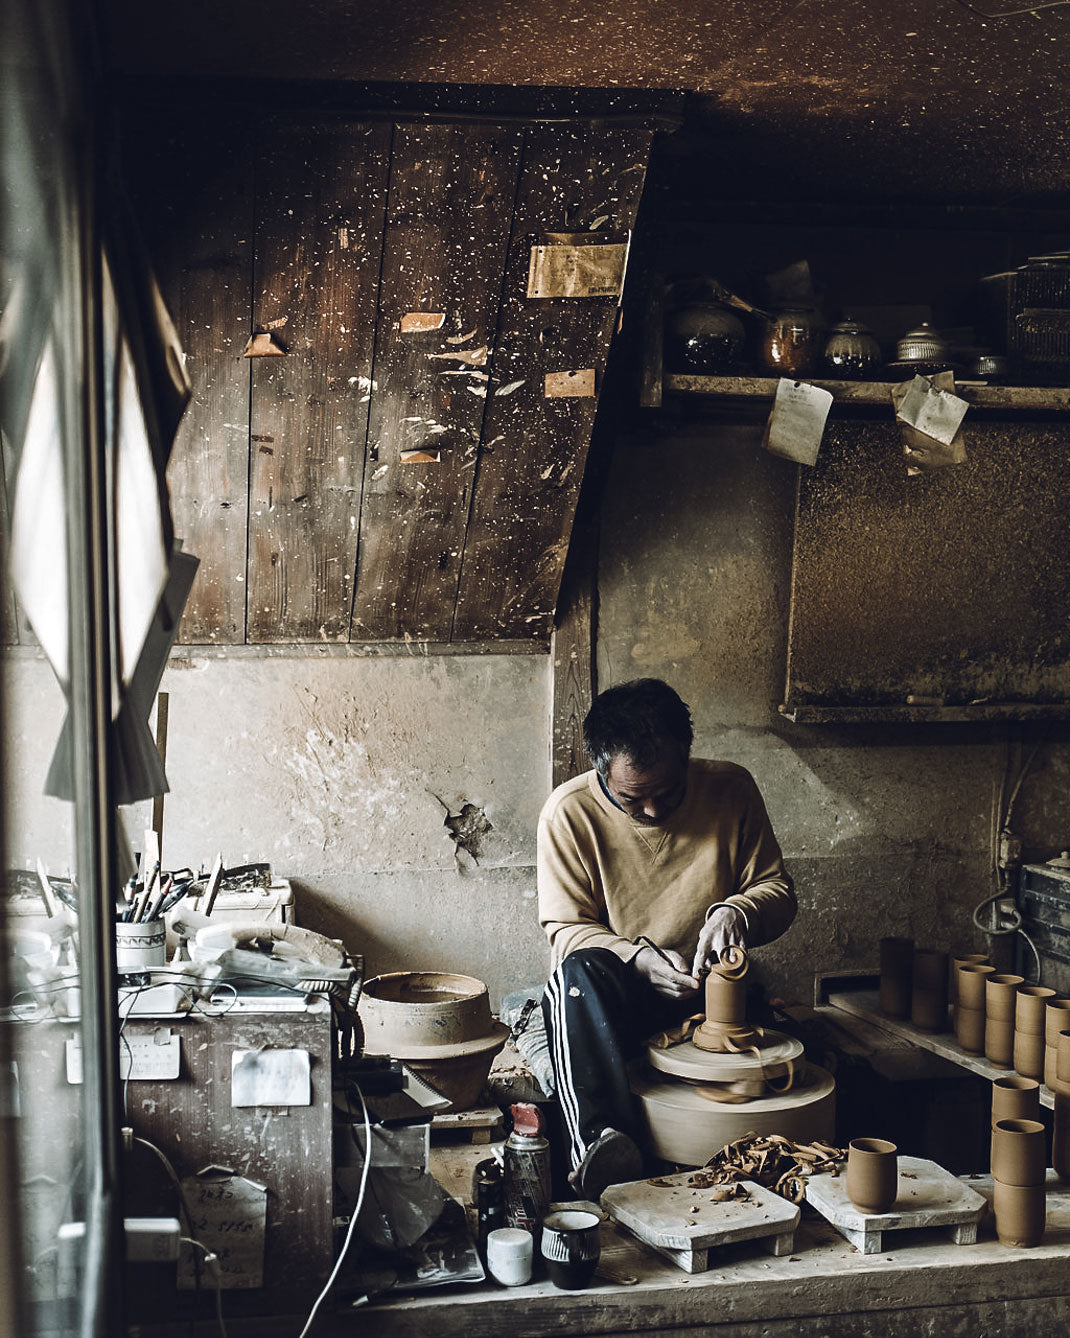 Making pots on a pottery wheel in the Onta pottery village